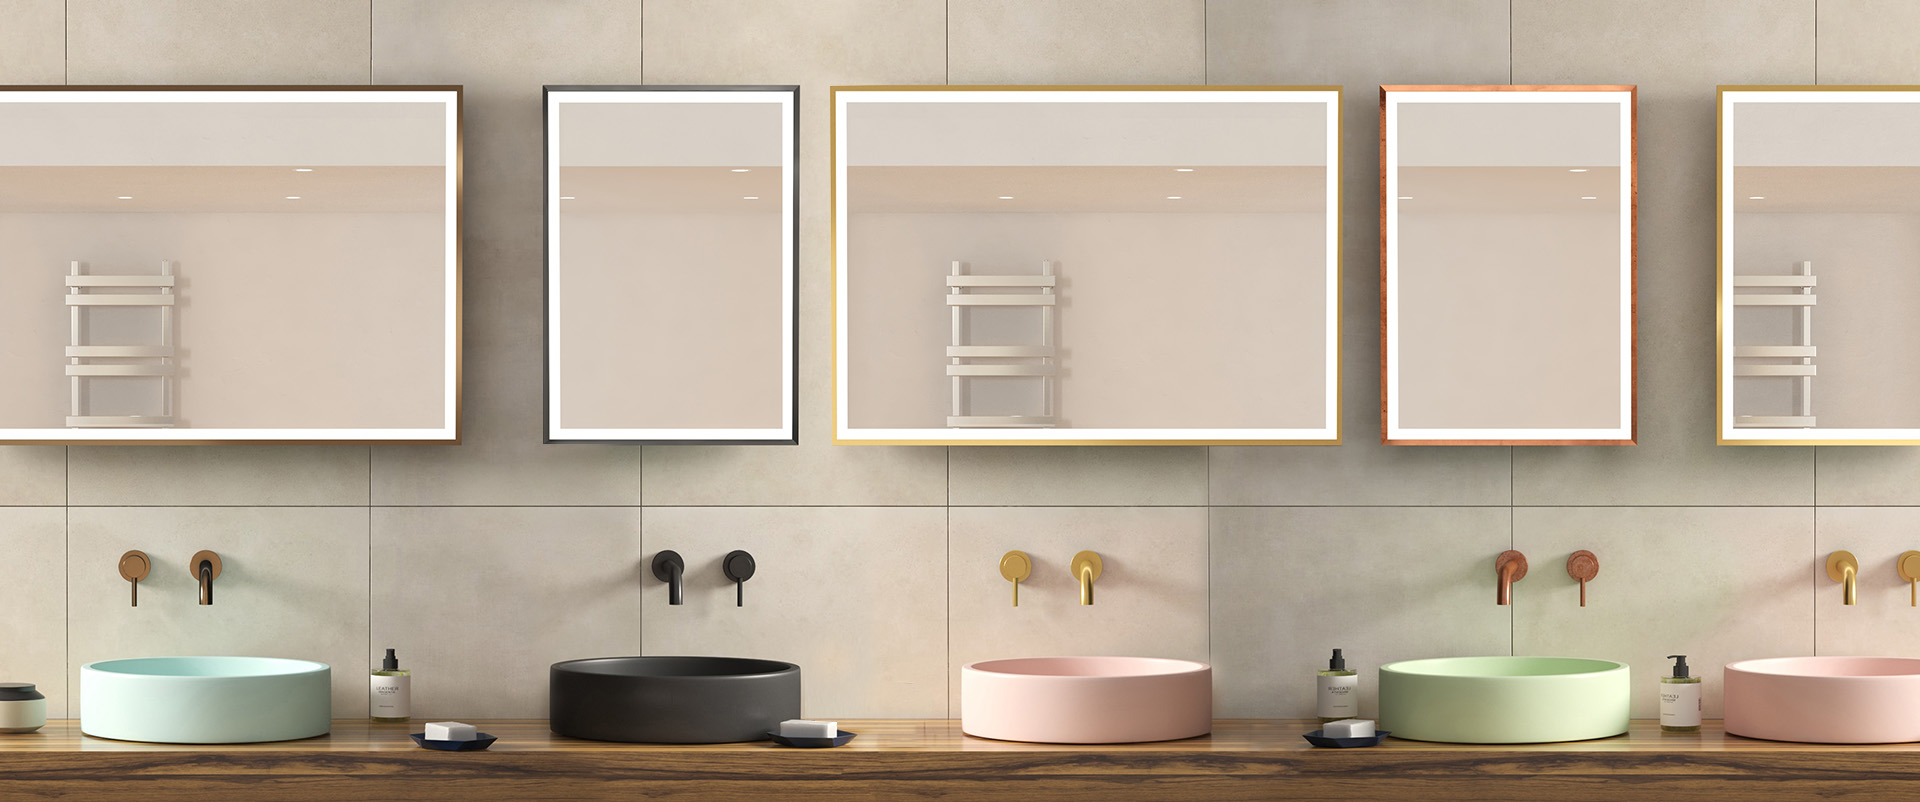 Edge-lit mirrors with metal frames